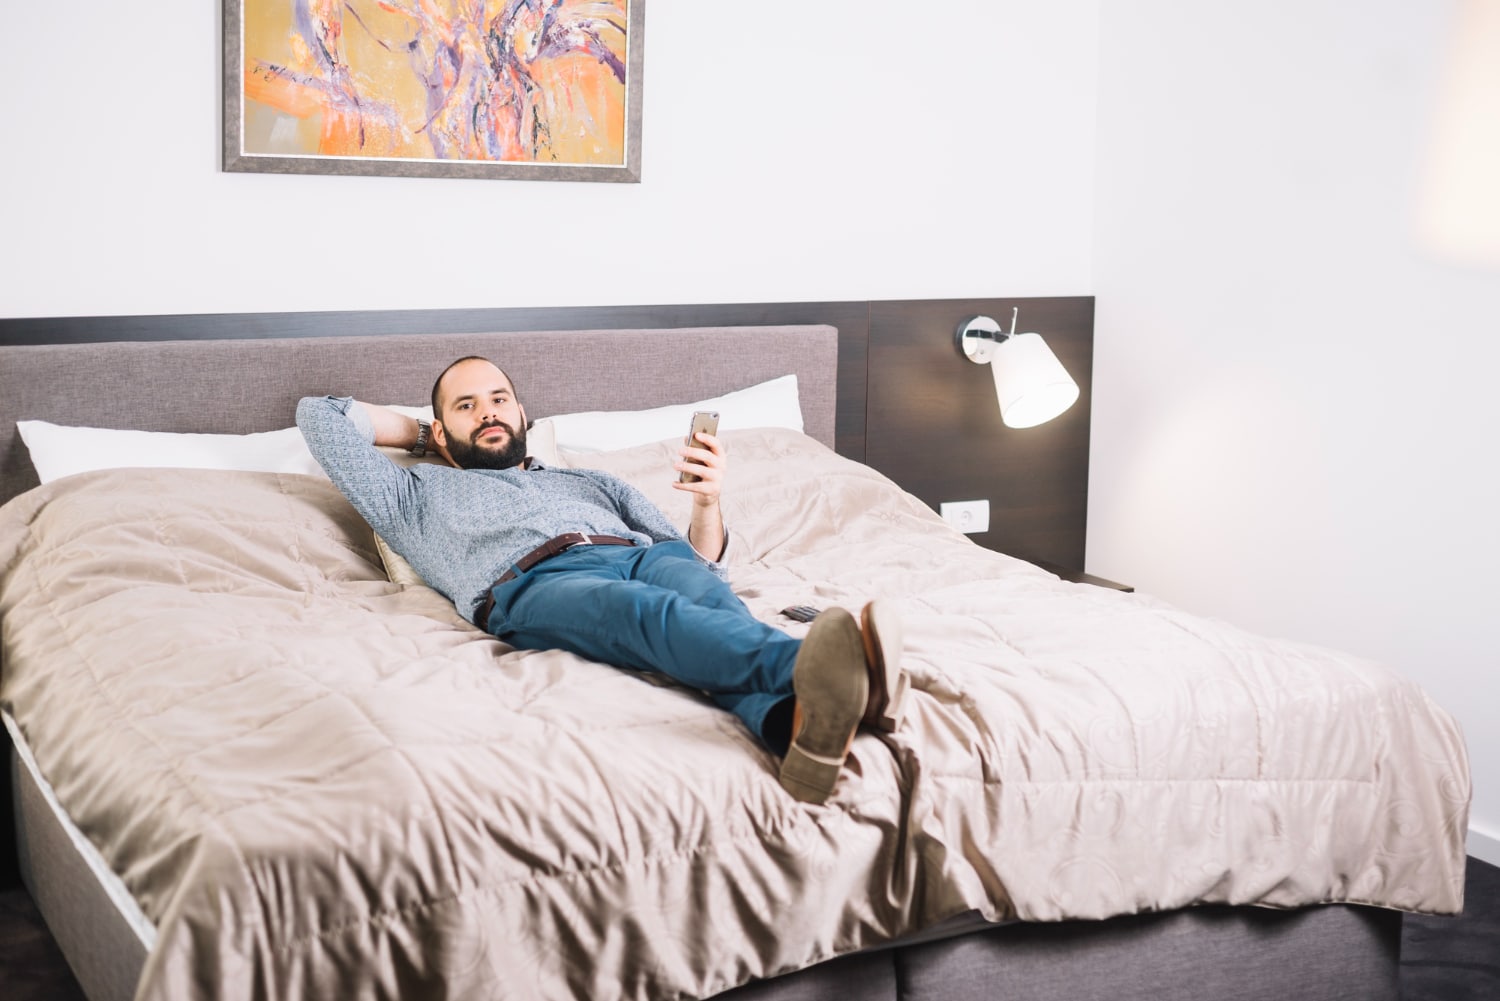 Sleep Better With Time4Sleep’s Quality Beds And Mattresses